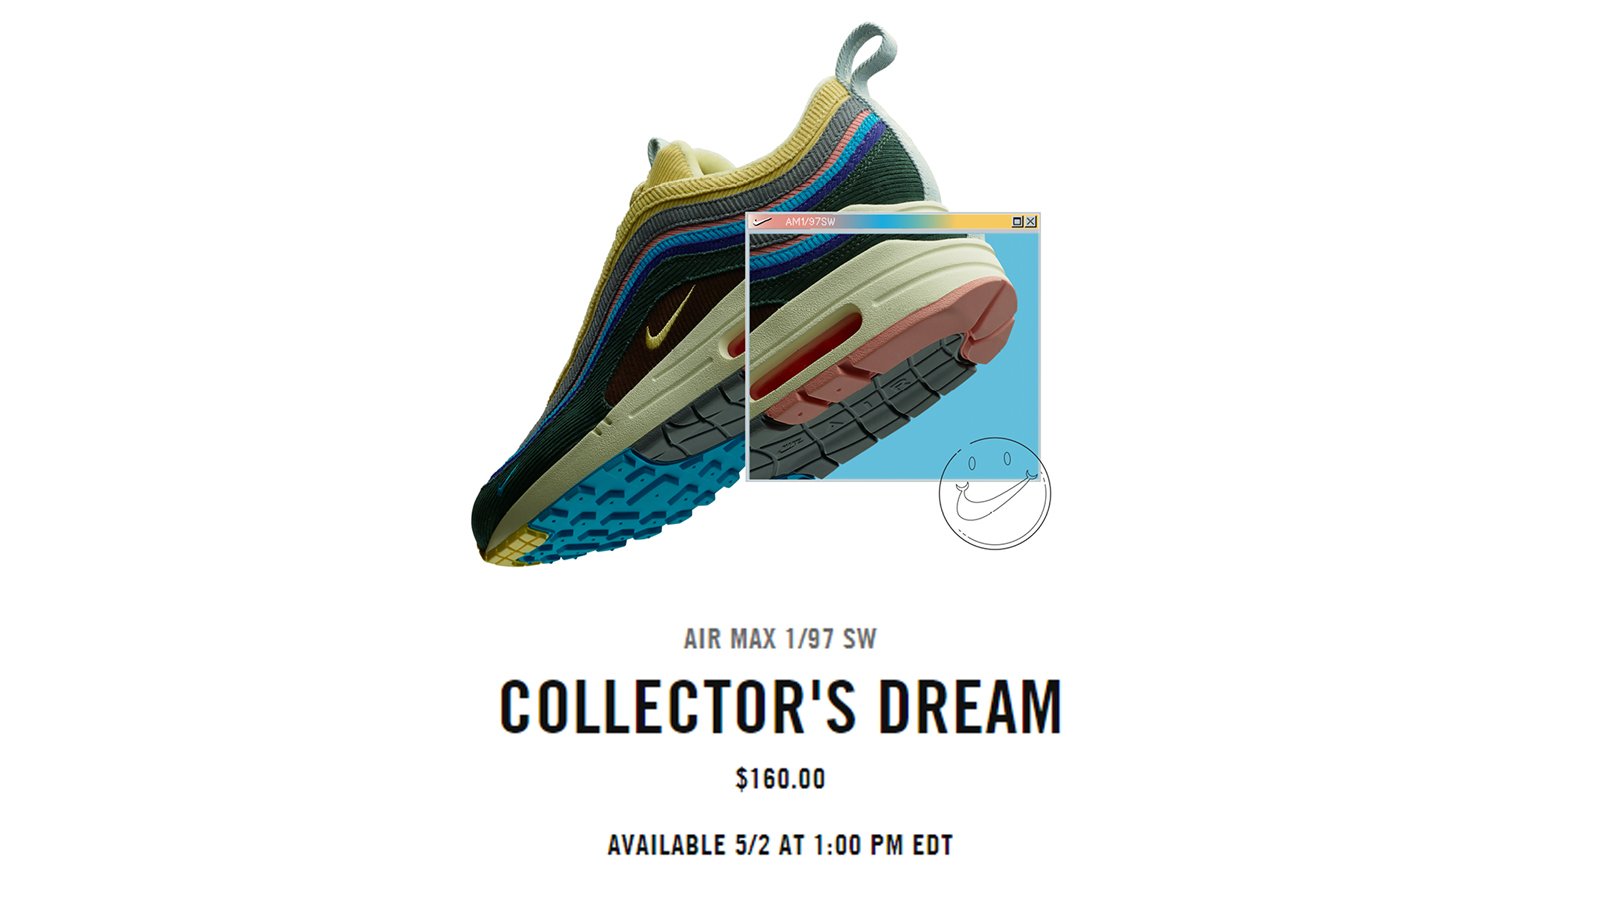 SOLELINKS on Twitter: "#RESTOCK 02, 2018 1PM EST Sean Wotherspoon x Nike Max 1/97 VF 'Collector's Dream' =&gt; https://t.co/G0PzWiL0G2 https://t.co/Of0dvEy9UP" / Twitter